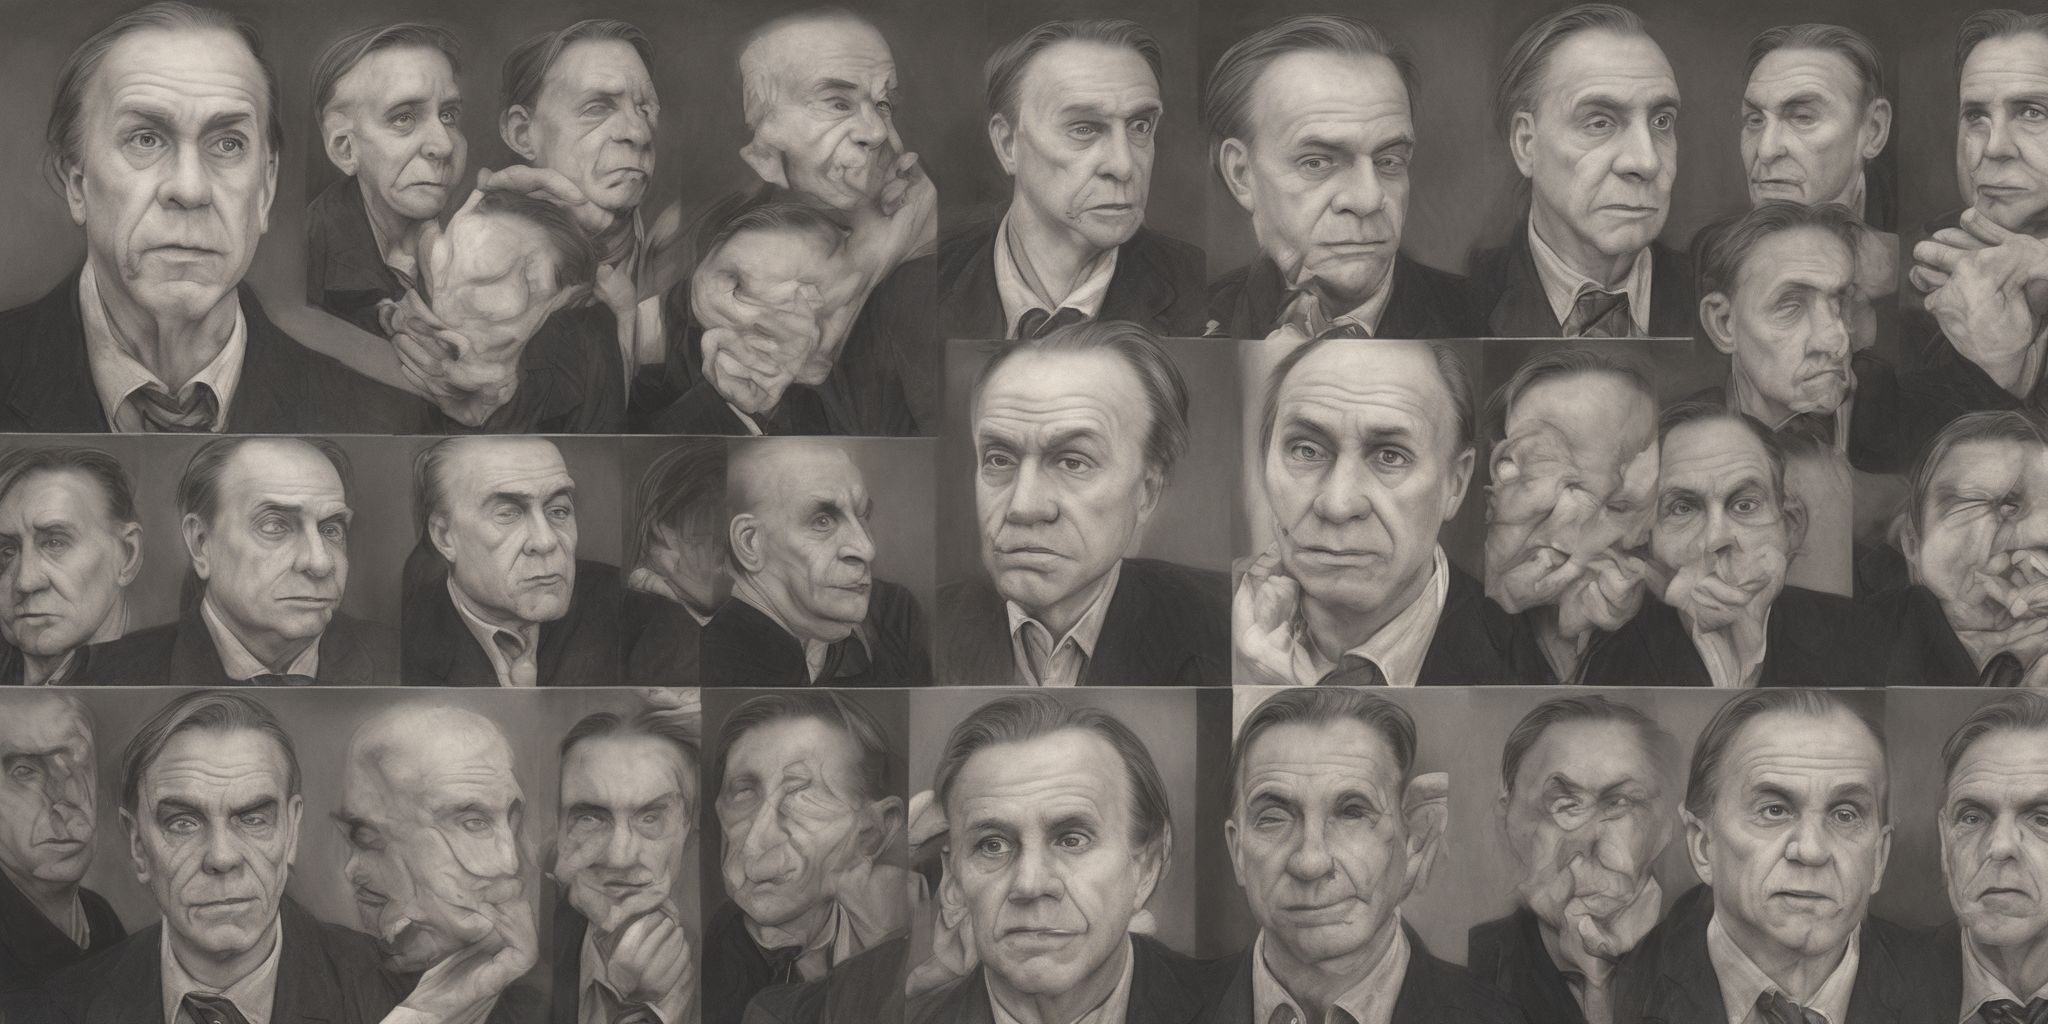 Teller  in realistic, photographic style